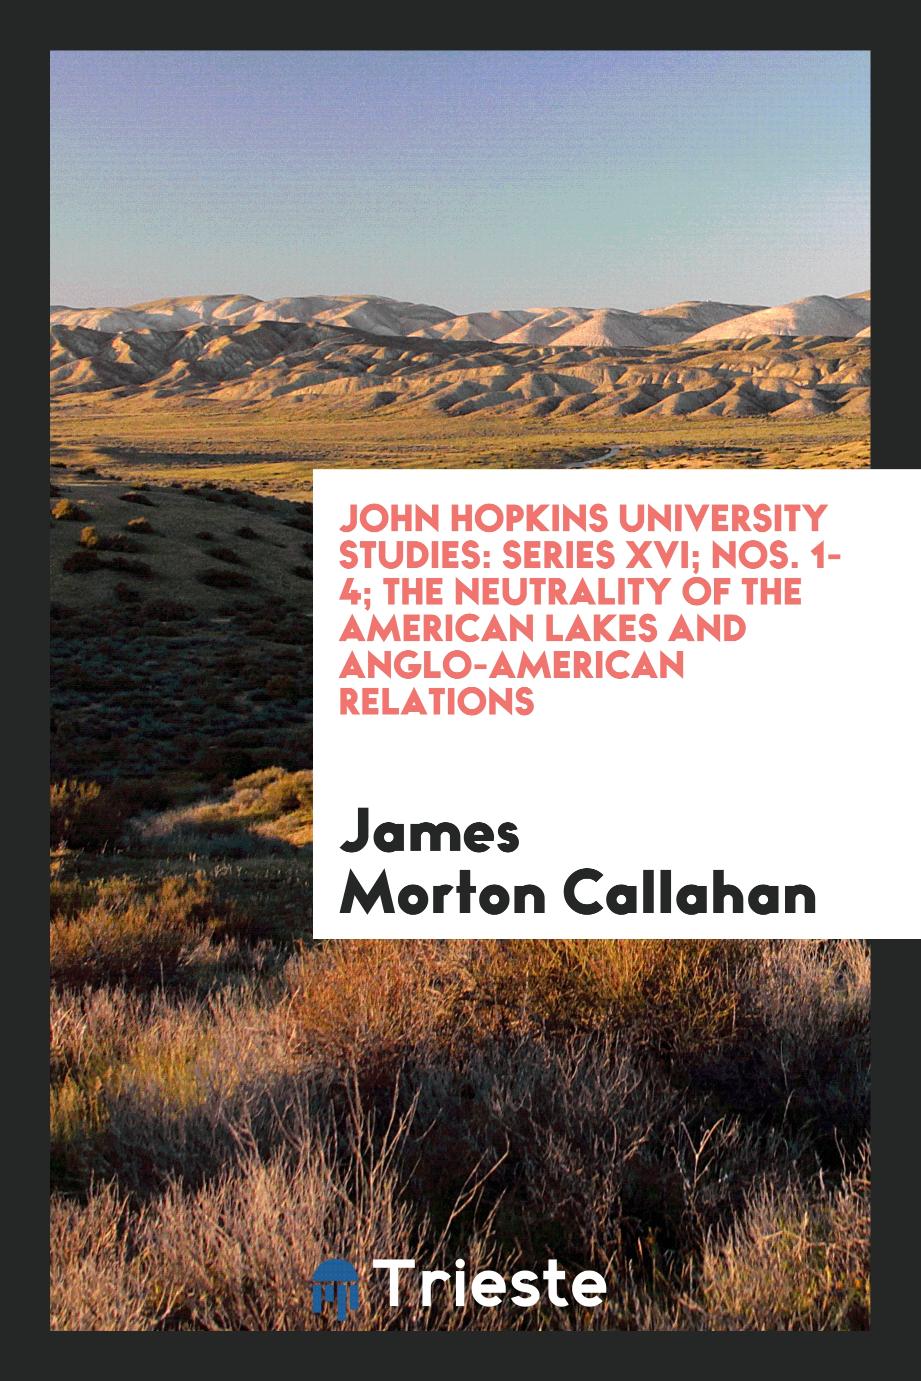 John Hopkins University Studies: Series XVI; Nos. 1-4; The neutrality of the American lakes and Anglo-American relations